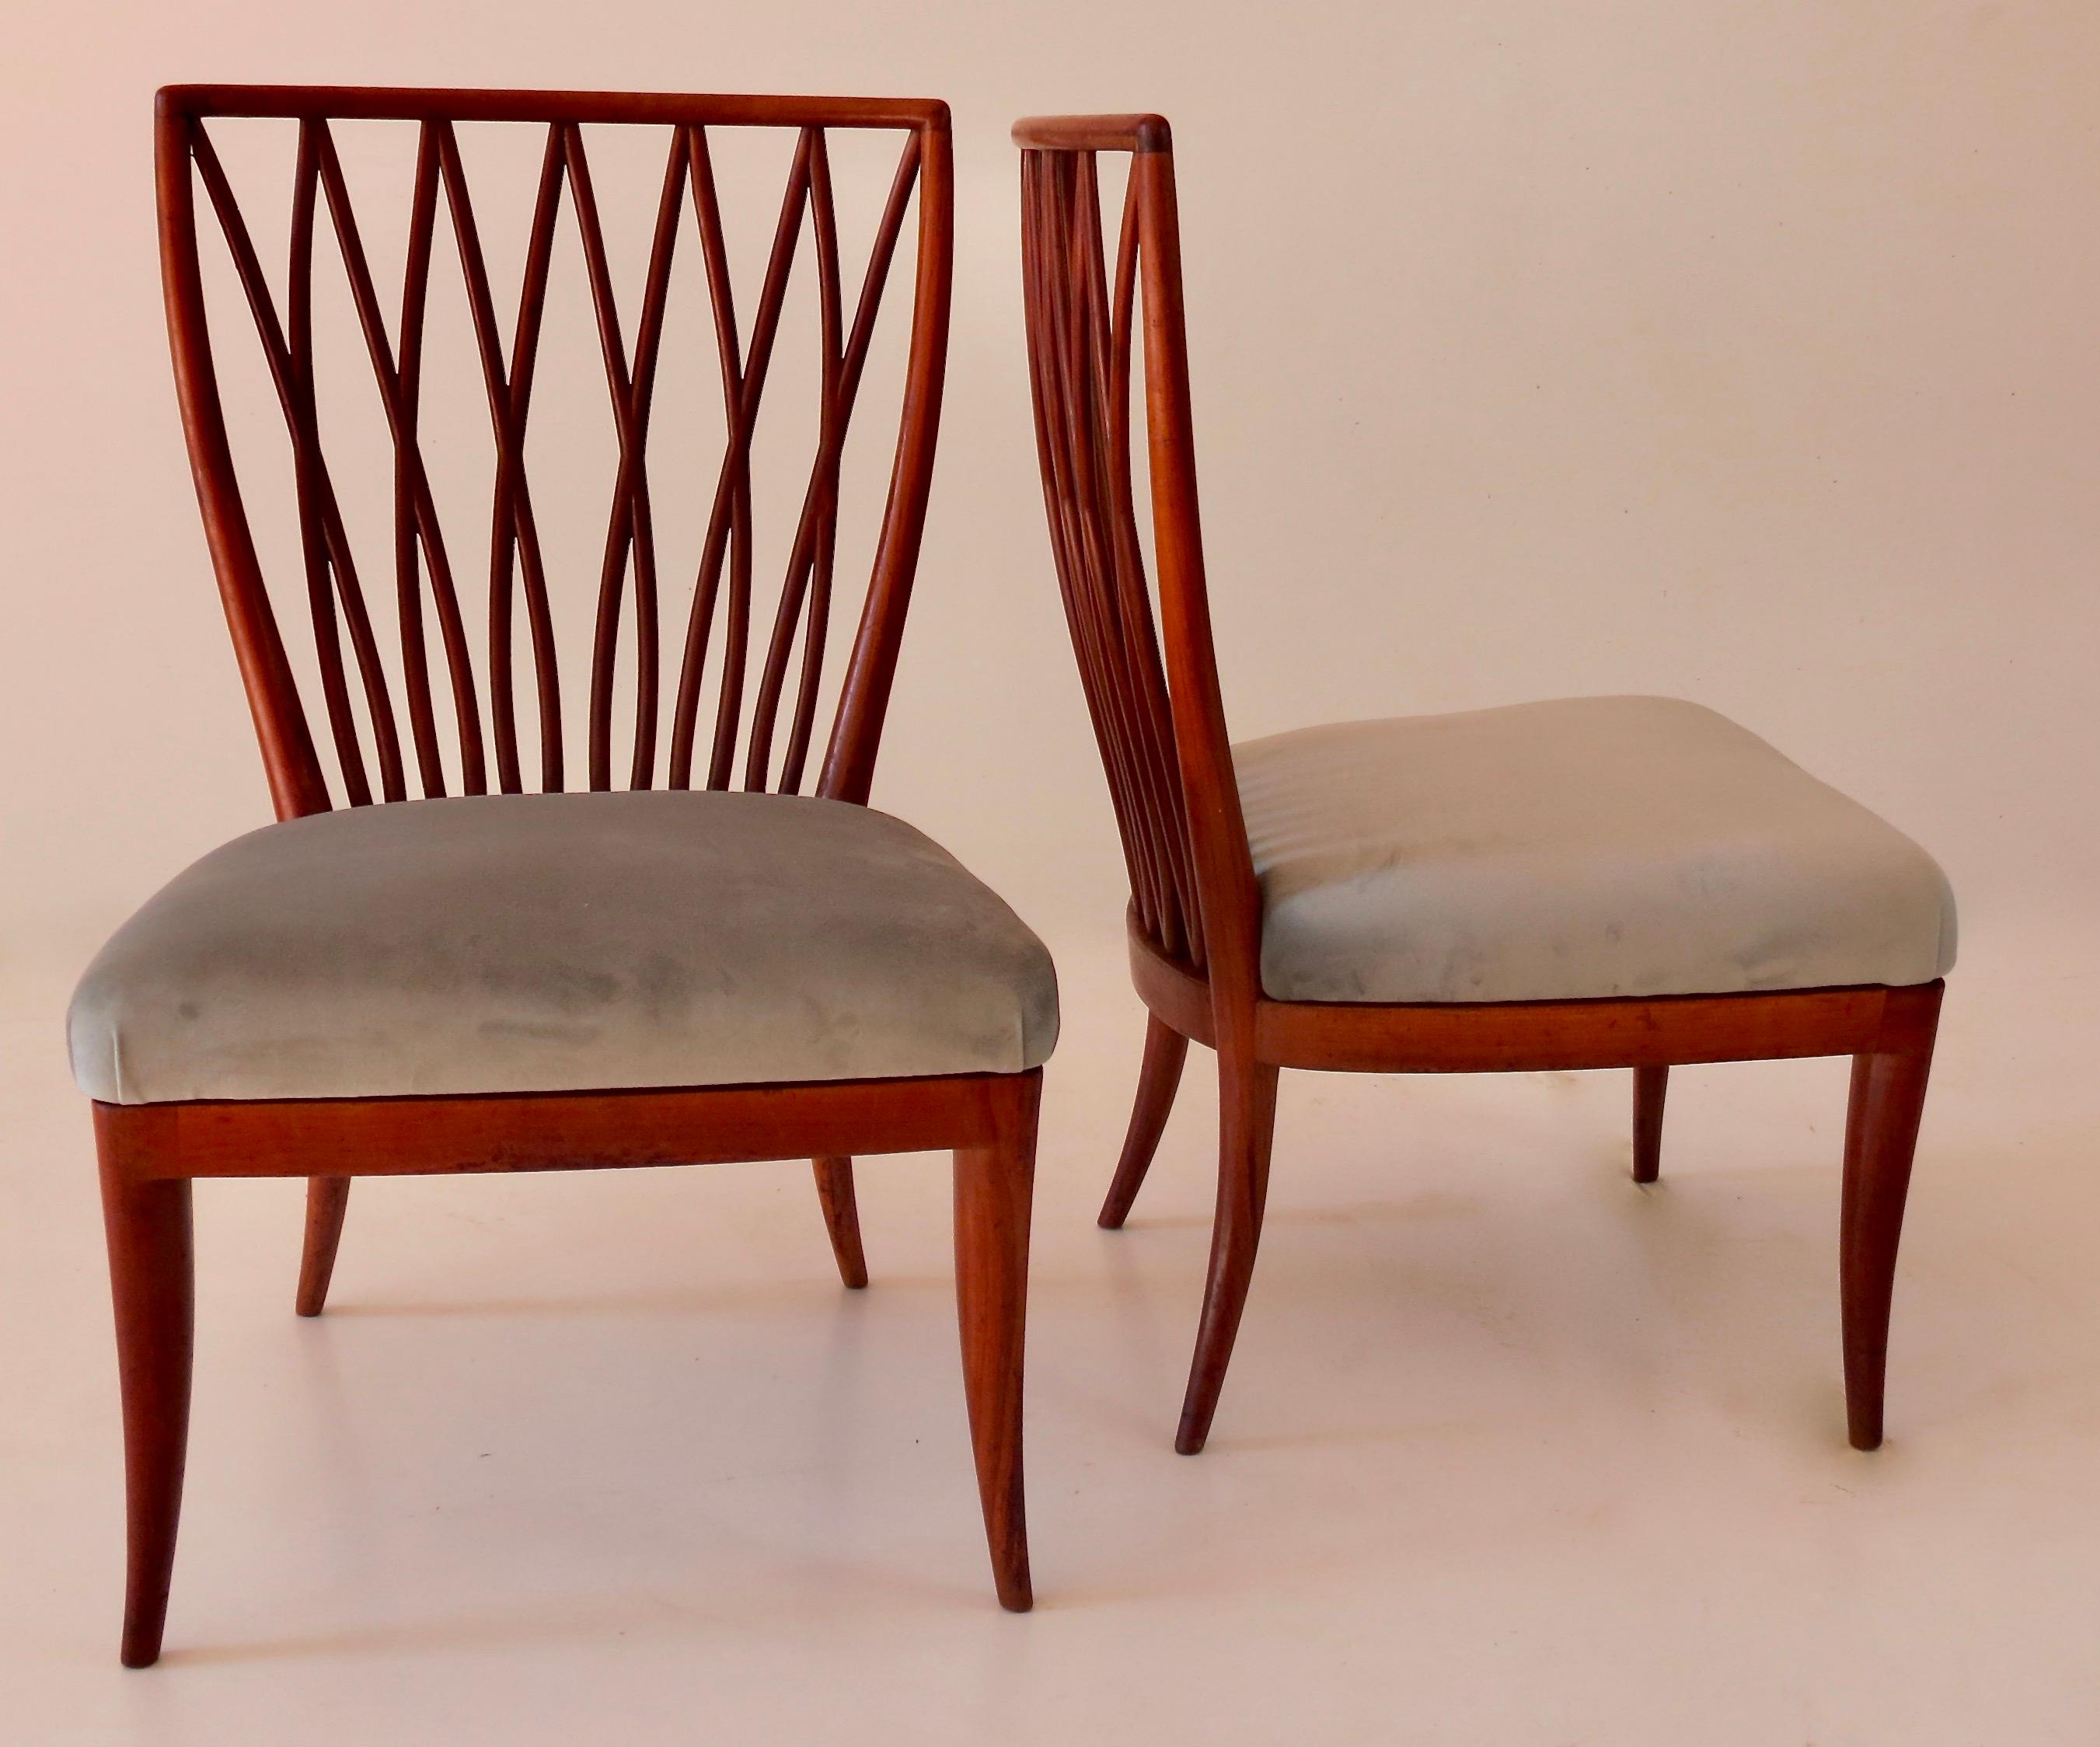 Elegant pair of lounge chairs by Arch Andrea Busiri Vici, late 40s
Very elegant wood grid backrest
cherrywood and reupholstery in a mint green velvet 
good condition 
some little signs on the wood under the seat
Measures: height: 84 cm; 60 x 52